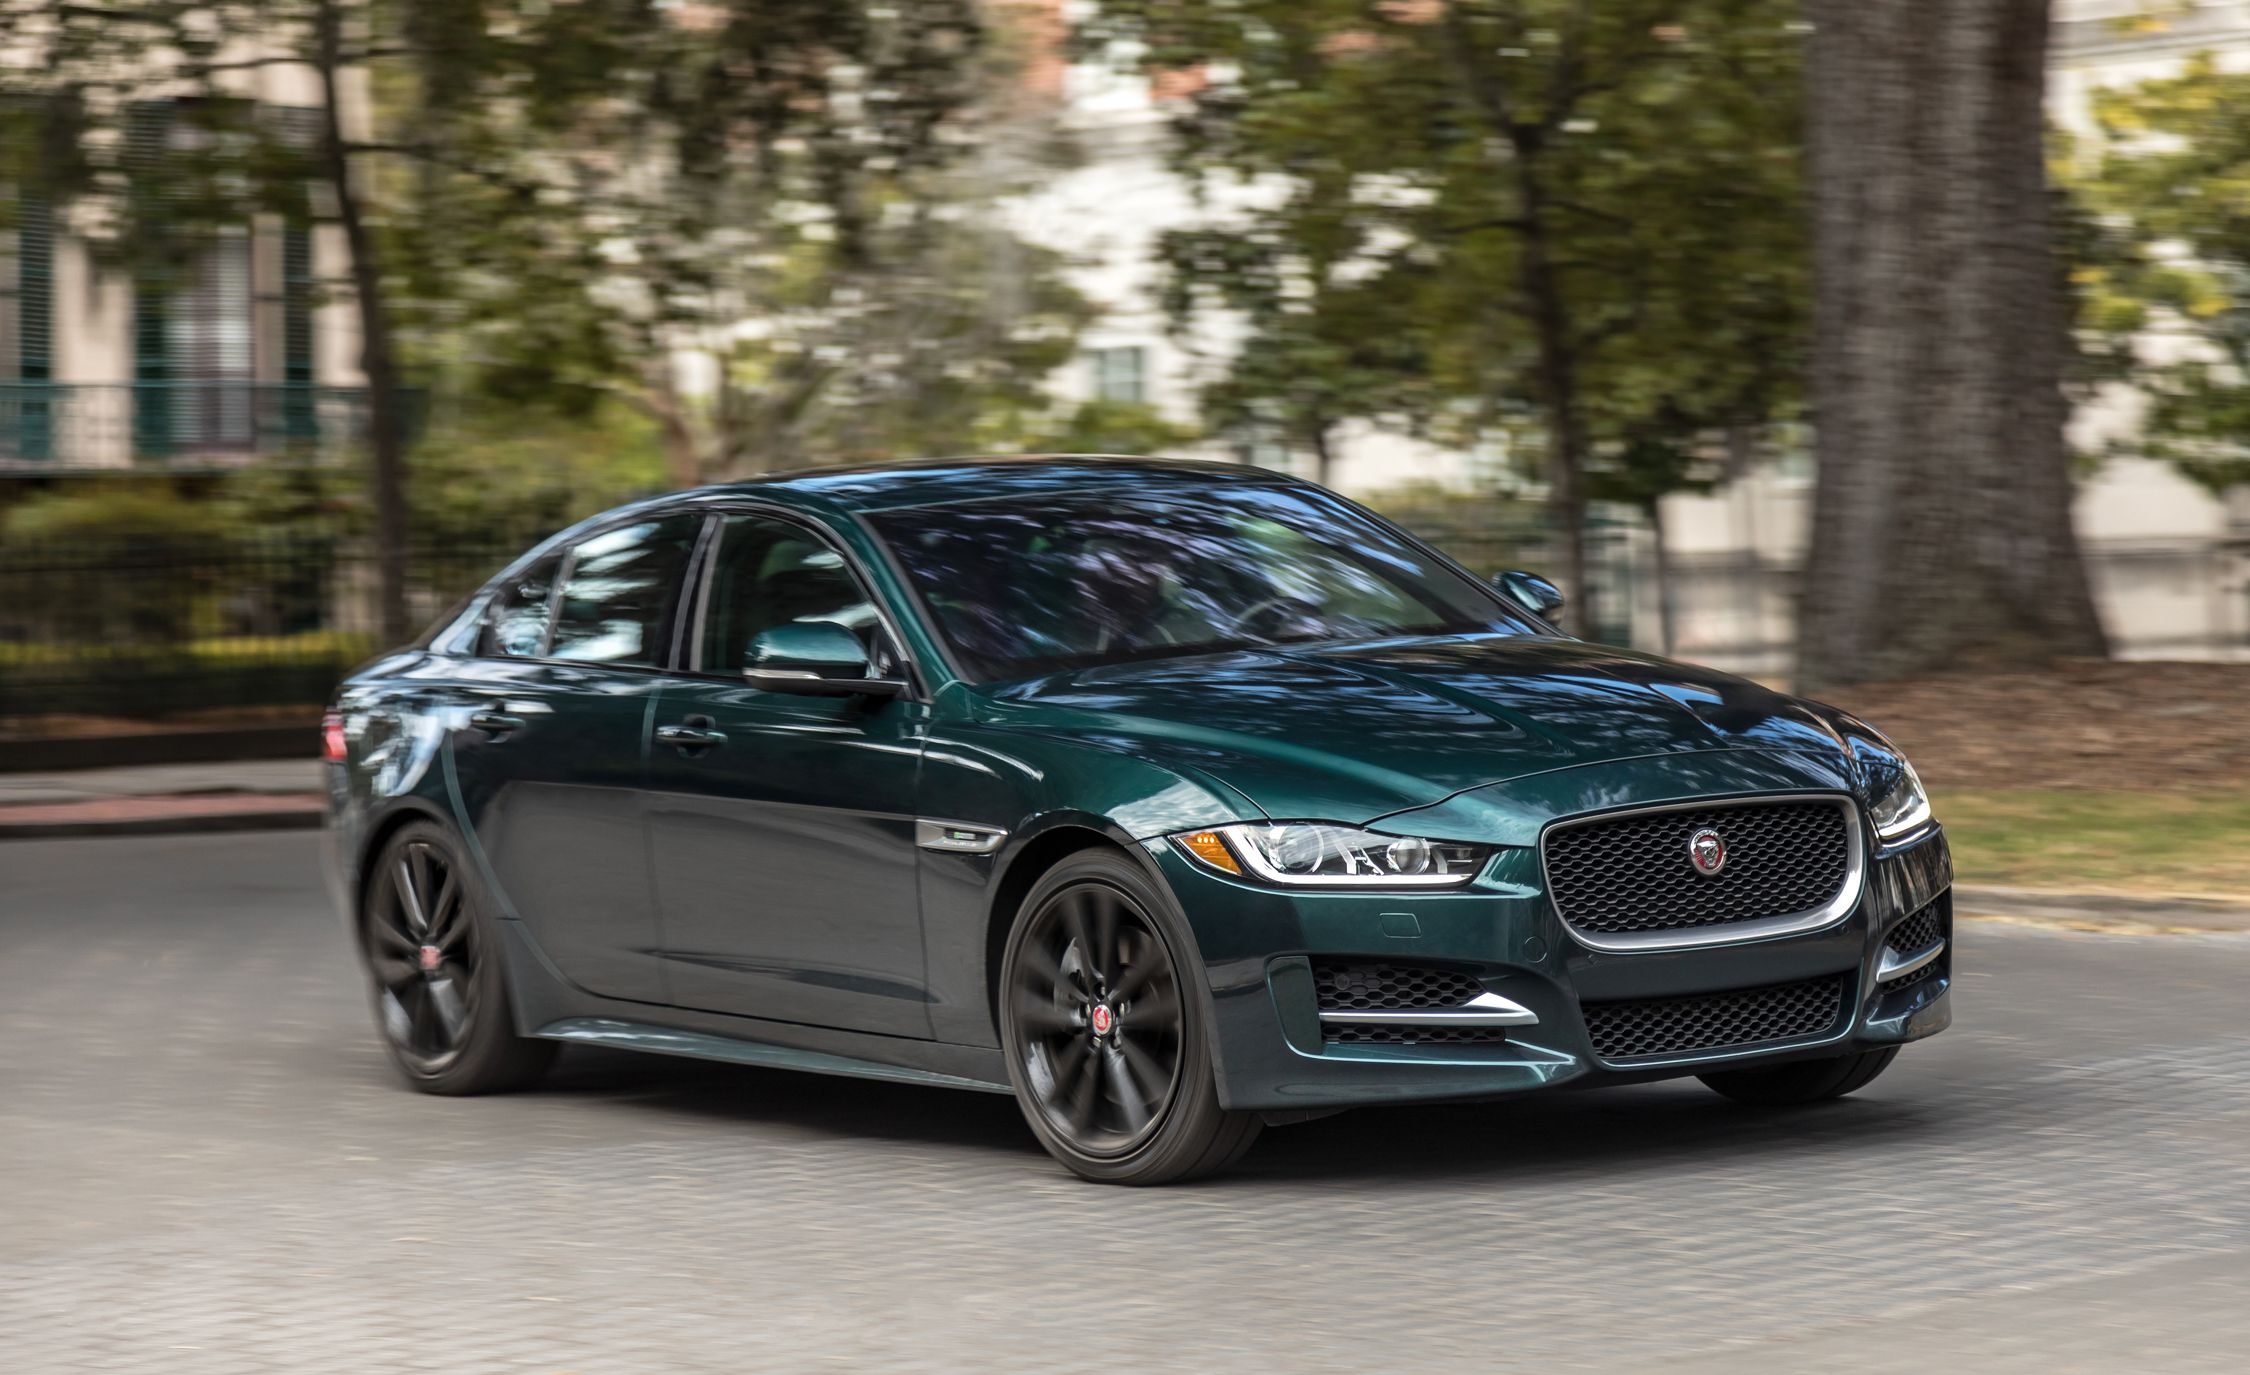 2017 Jaguar XE Review, Pricing, & Pictures